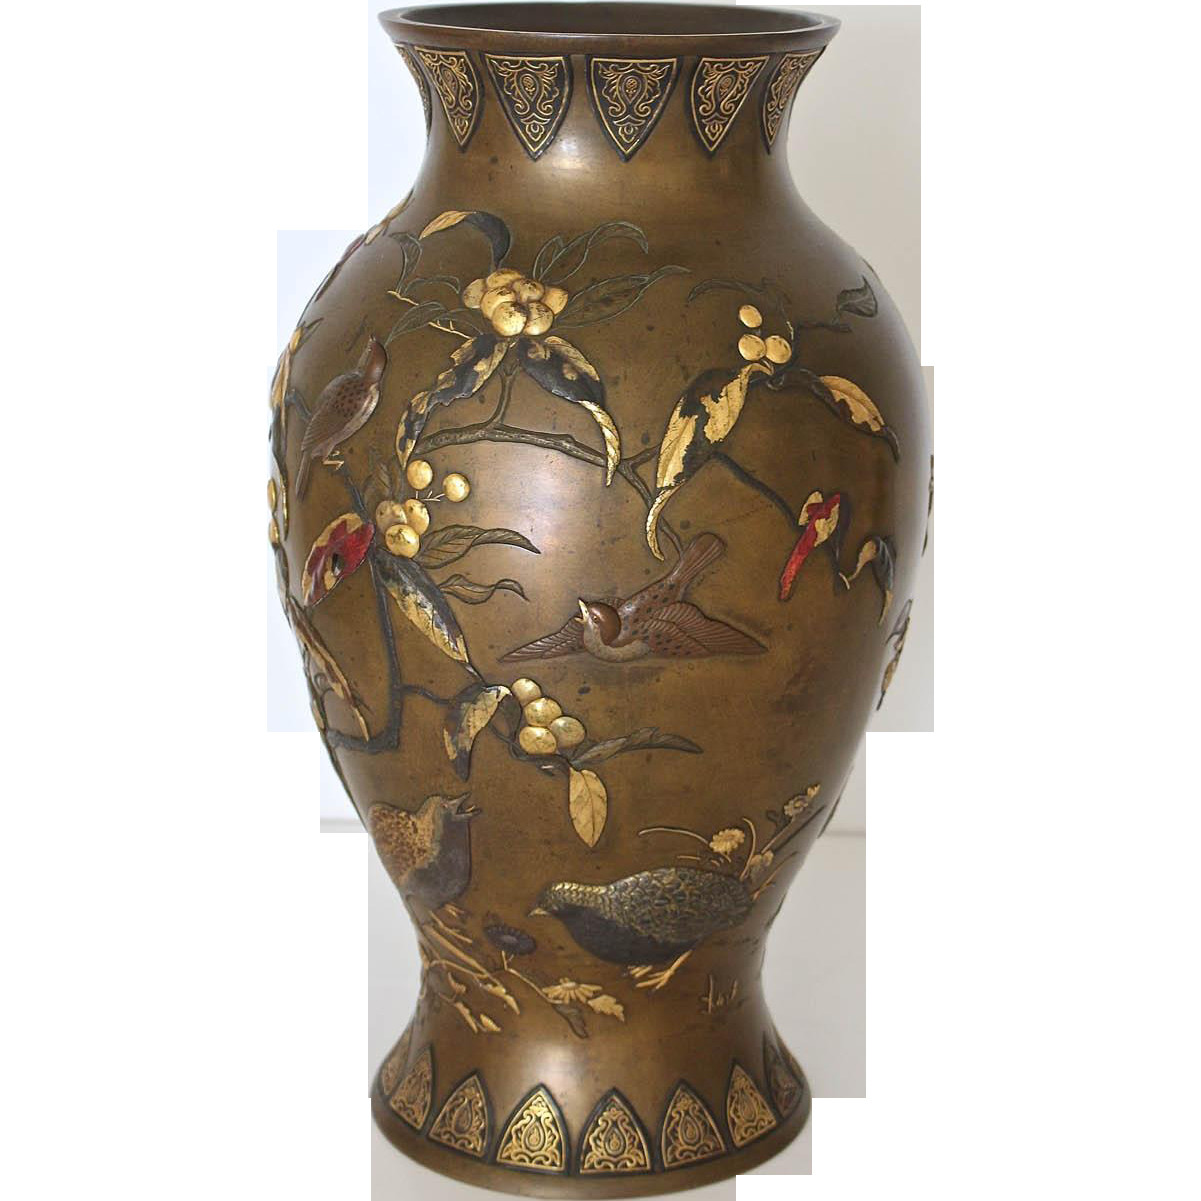 26 Lovely Bronze Vases for Sale 2024 free download bronze vases for sale of magnificent taisho period japanese mixed metal bronze vase with regard to ed76f642d3e2bde21f73035f8e0cd5d7